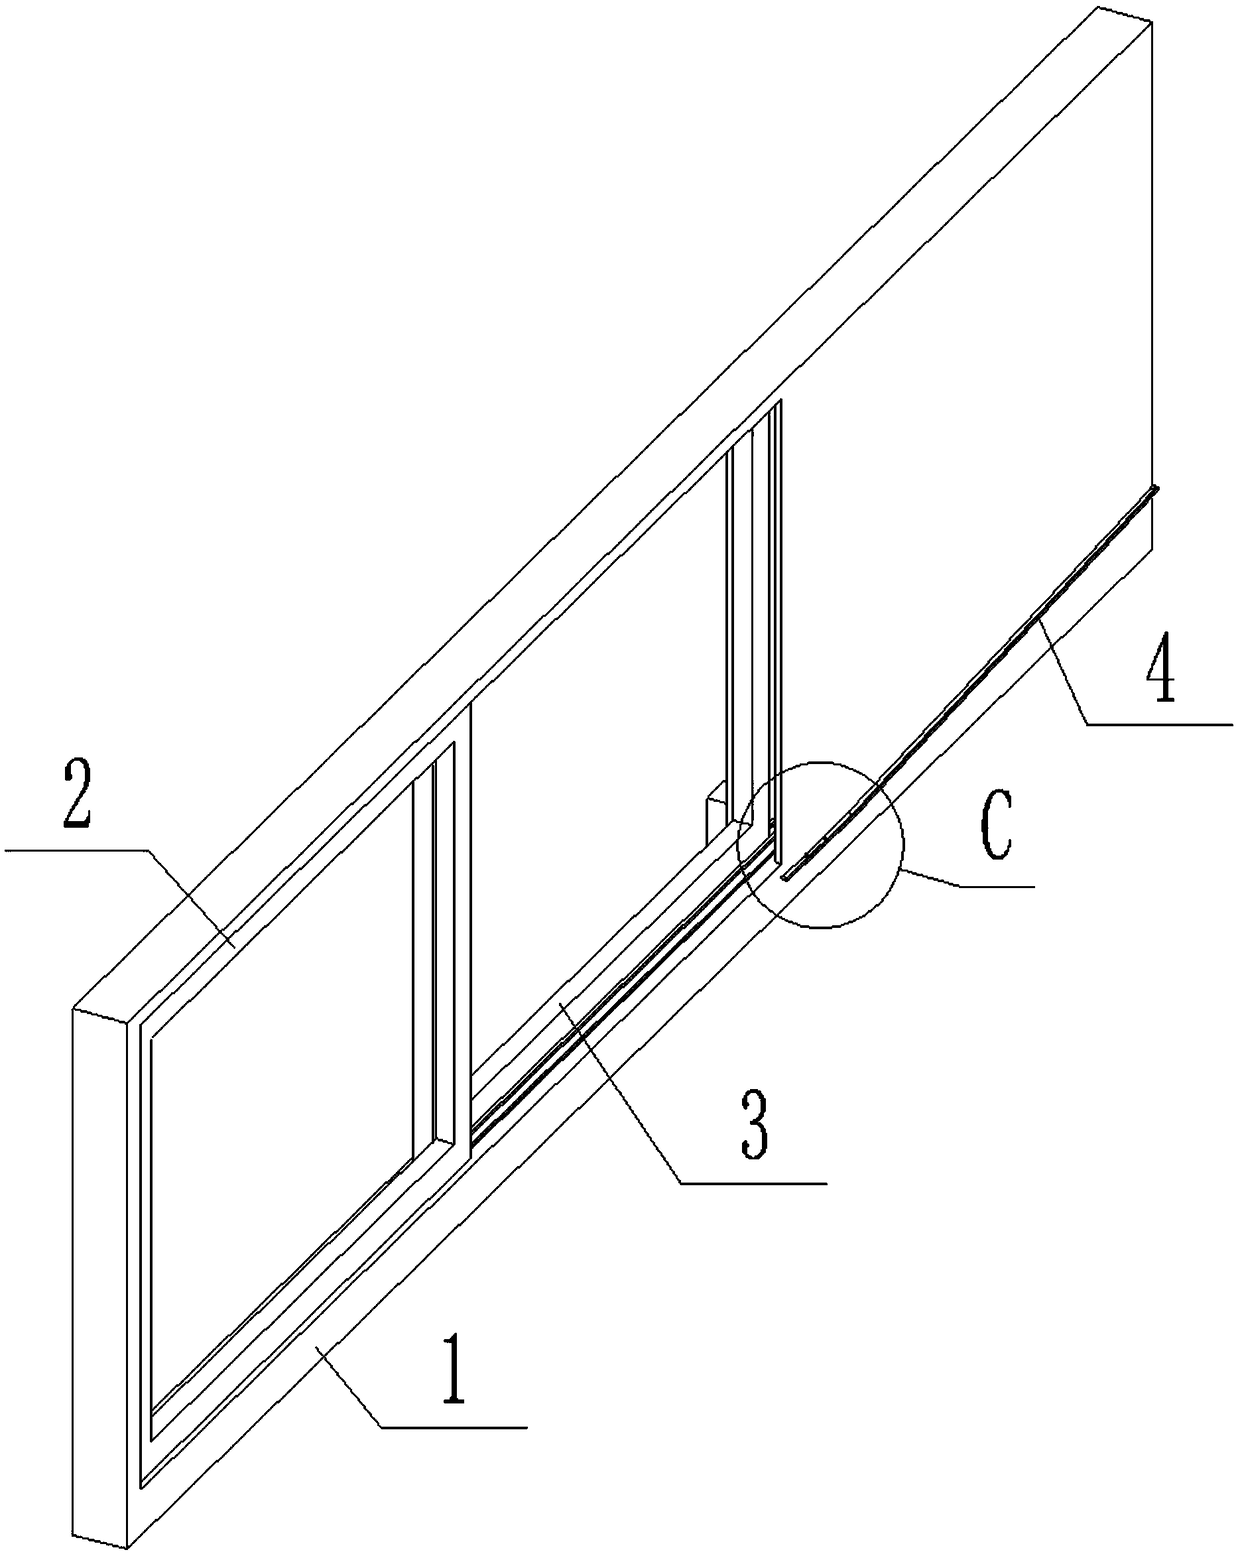 Externally mounted window structure for architectural indoor space